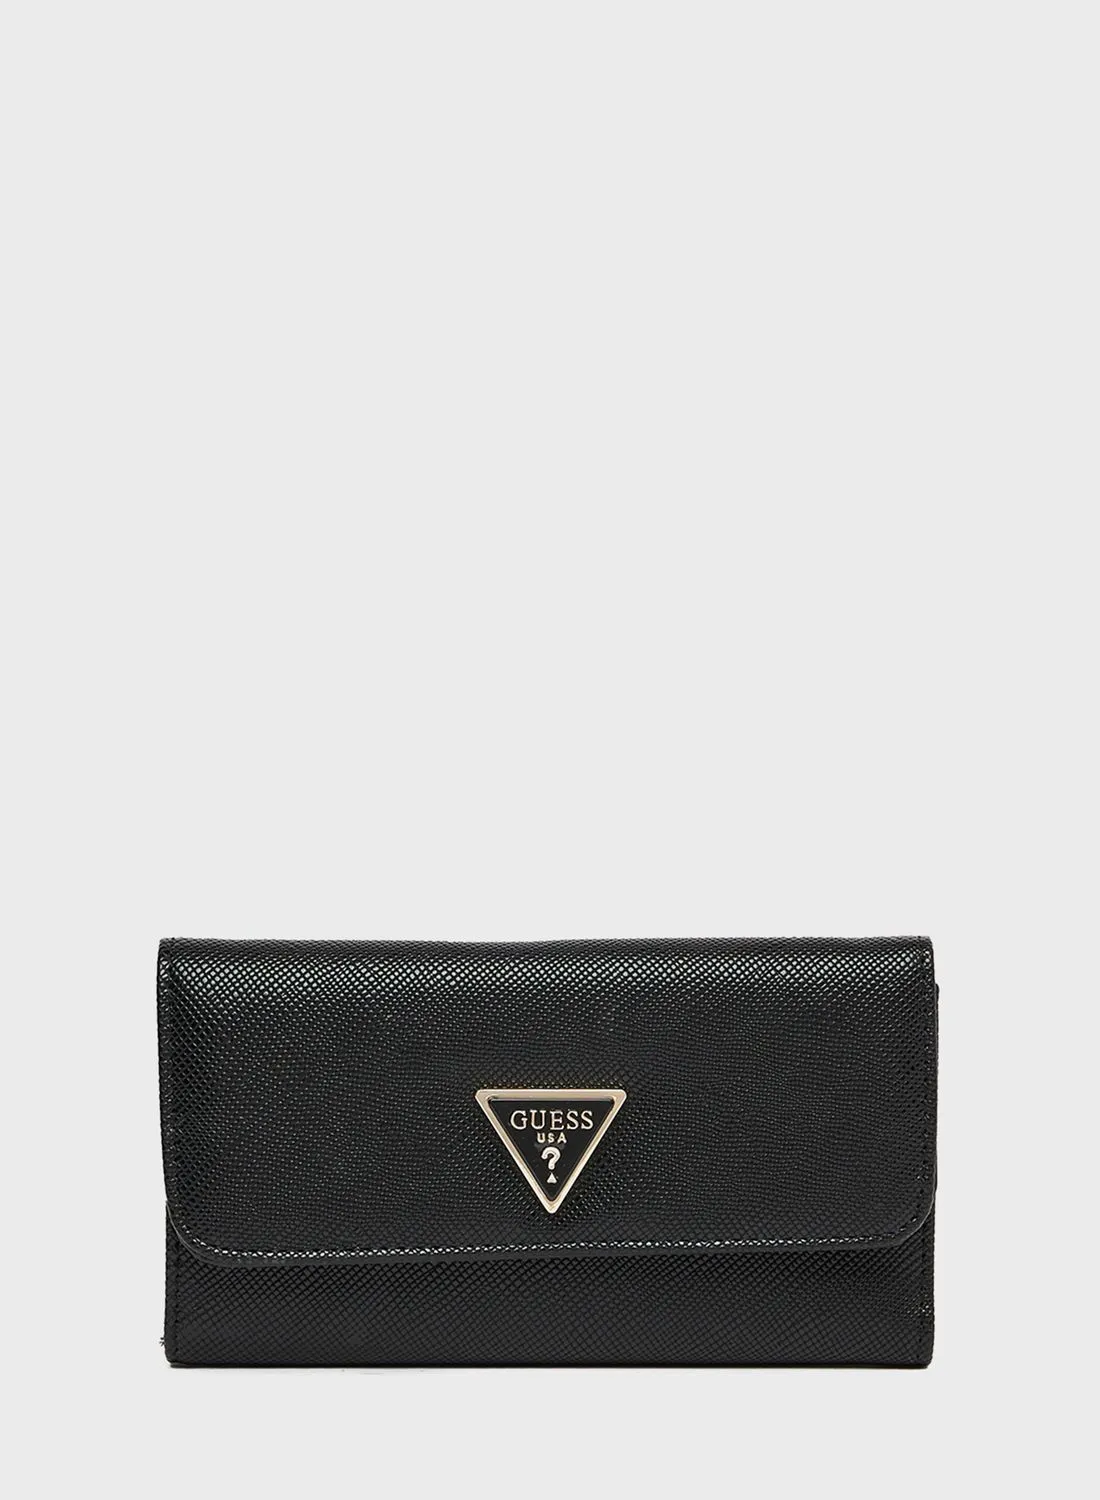 GUESS Noelle Trifold Wallet